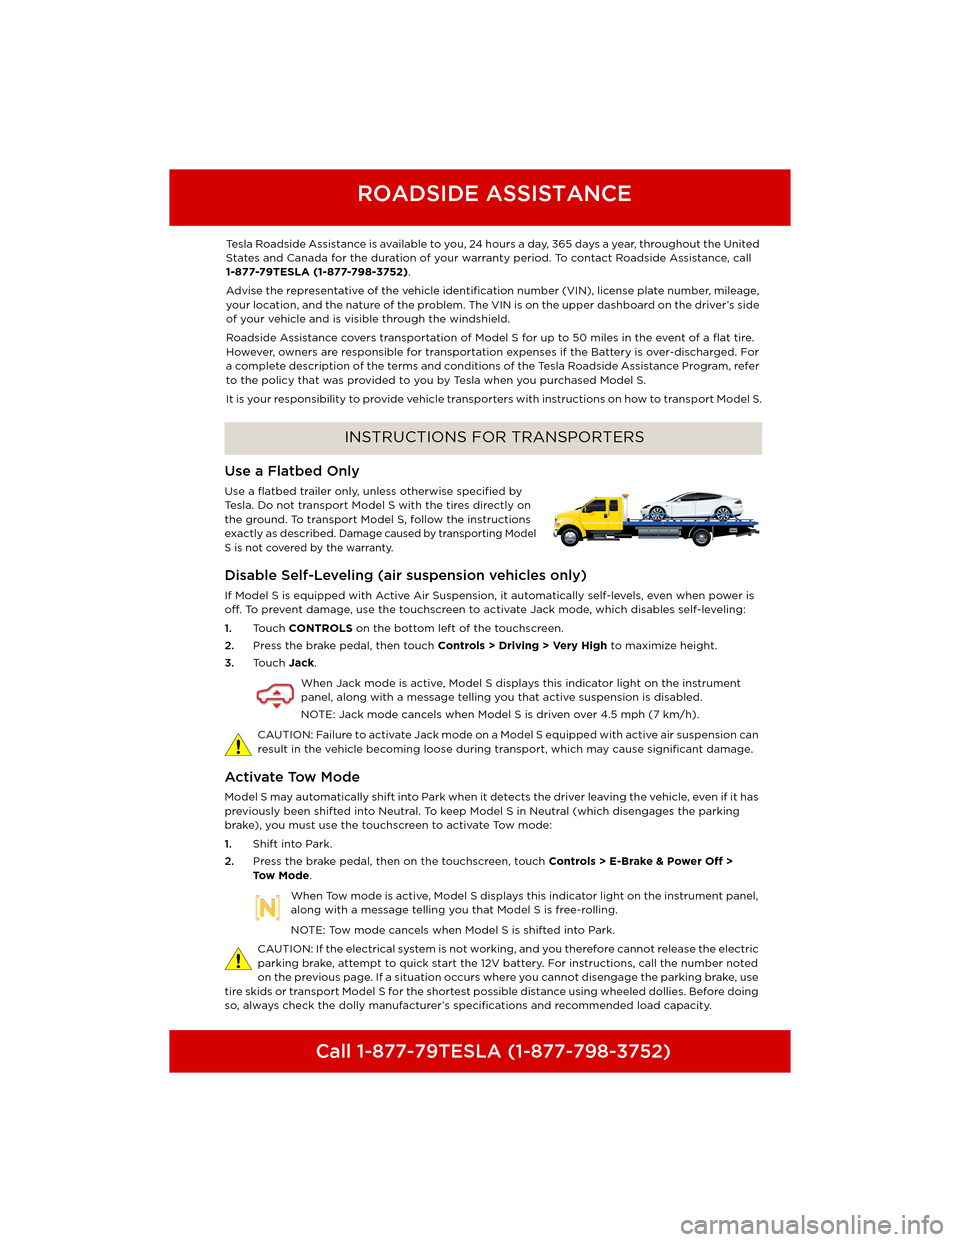 TESLA MODEL S 2014  Quick Guide (North America)  Call 1-877-79TESLA (1-877-798-3752)
ROADSIDE ASSISTANCE
INSTRUCTIONS FOR TRANSPORTERS
ROADSIDE ASSISTANCE
Roadside AssistanceTesla Roadside Assistance is available to you, 24 hours a day, 365 days a y